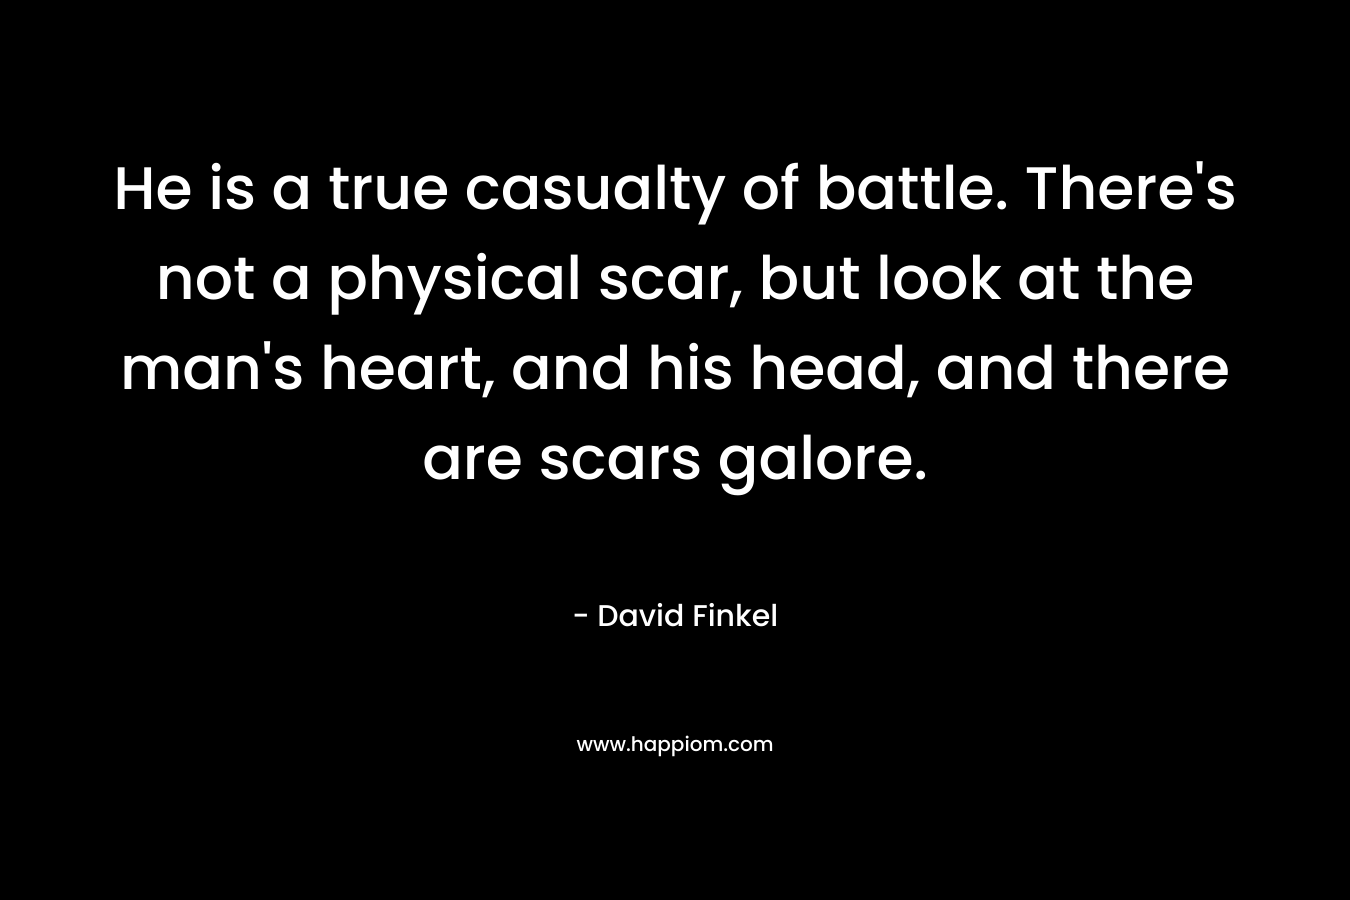 He is a true casualty of battle. There’s not a physical scar, but look at the man’s heart, and his head, and there are scars galore. – David Finkel